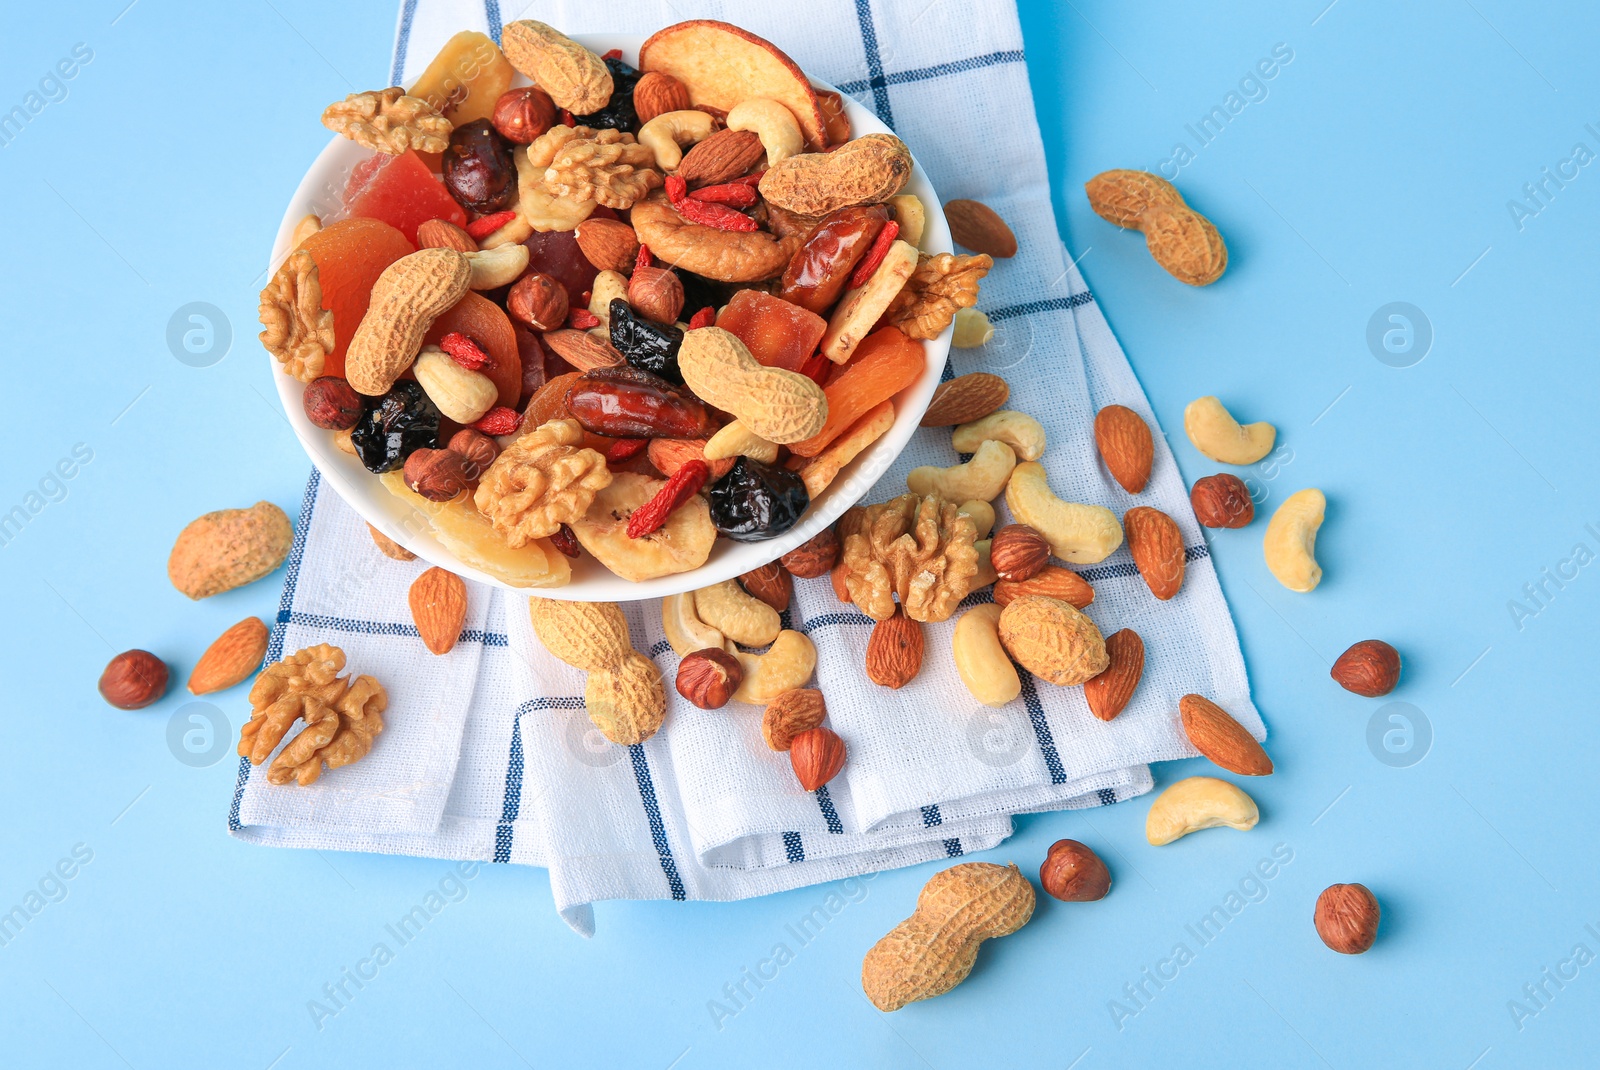 Photo of Bowl with mixed dried fruits and nuts on light blue background, above view